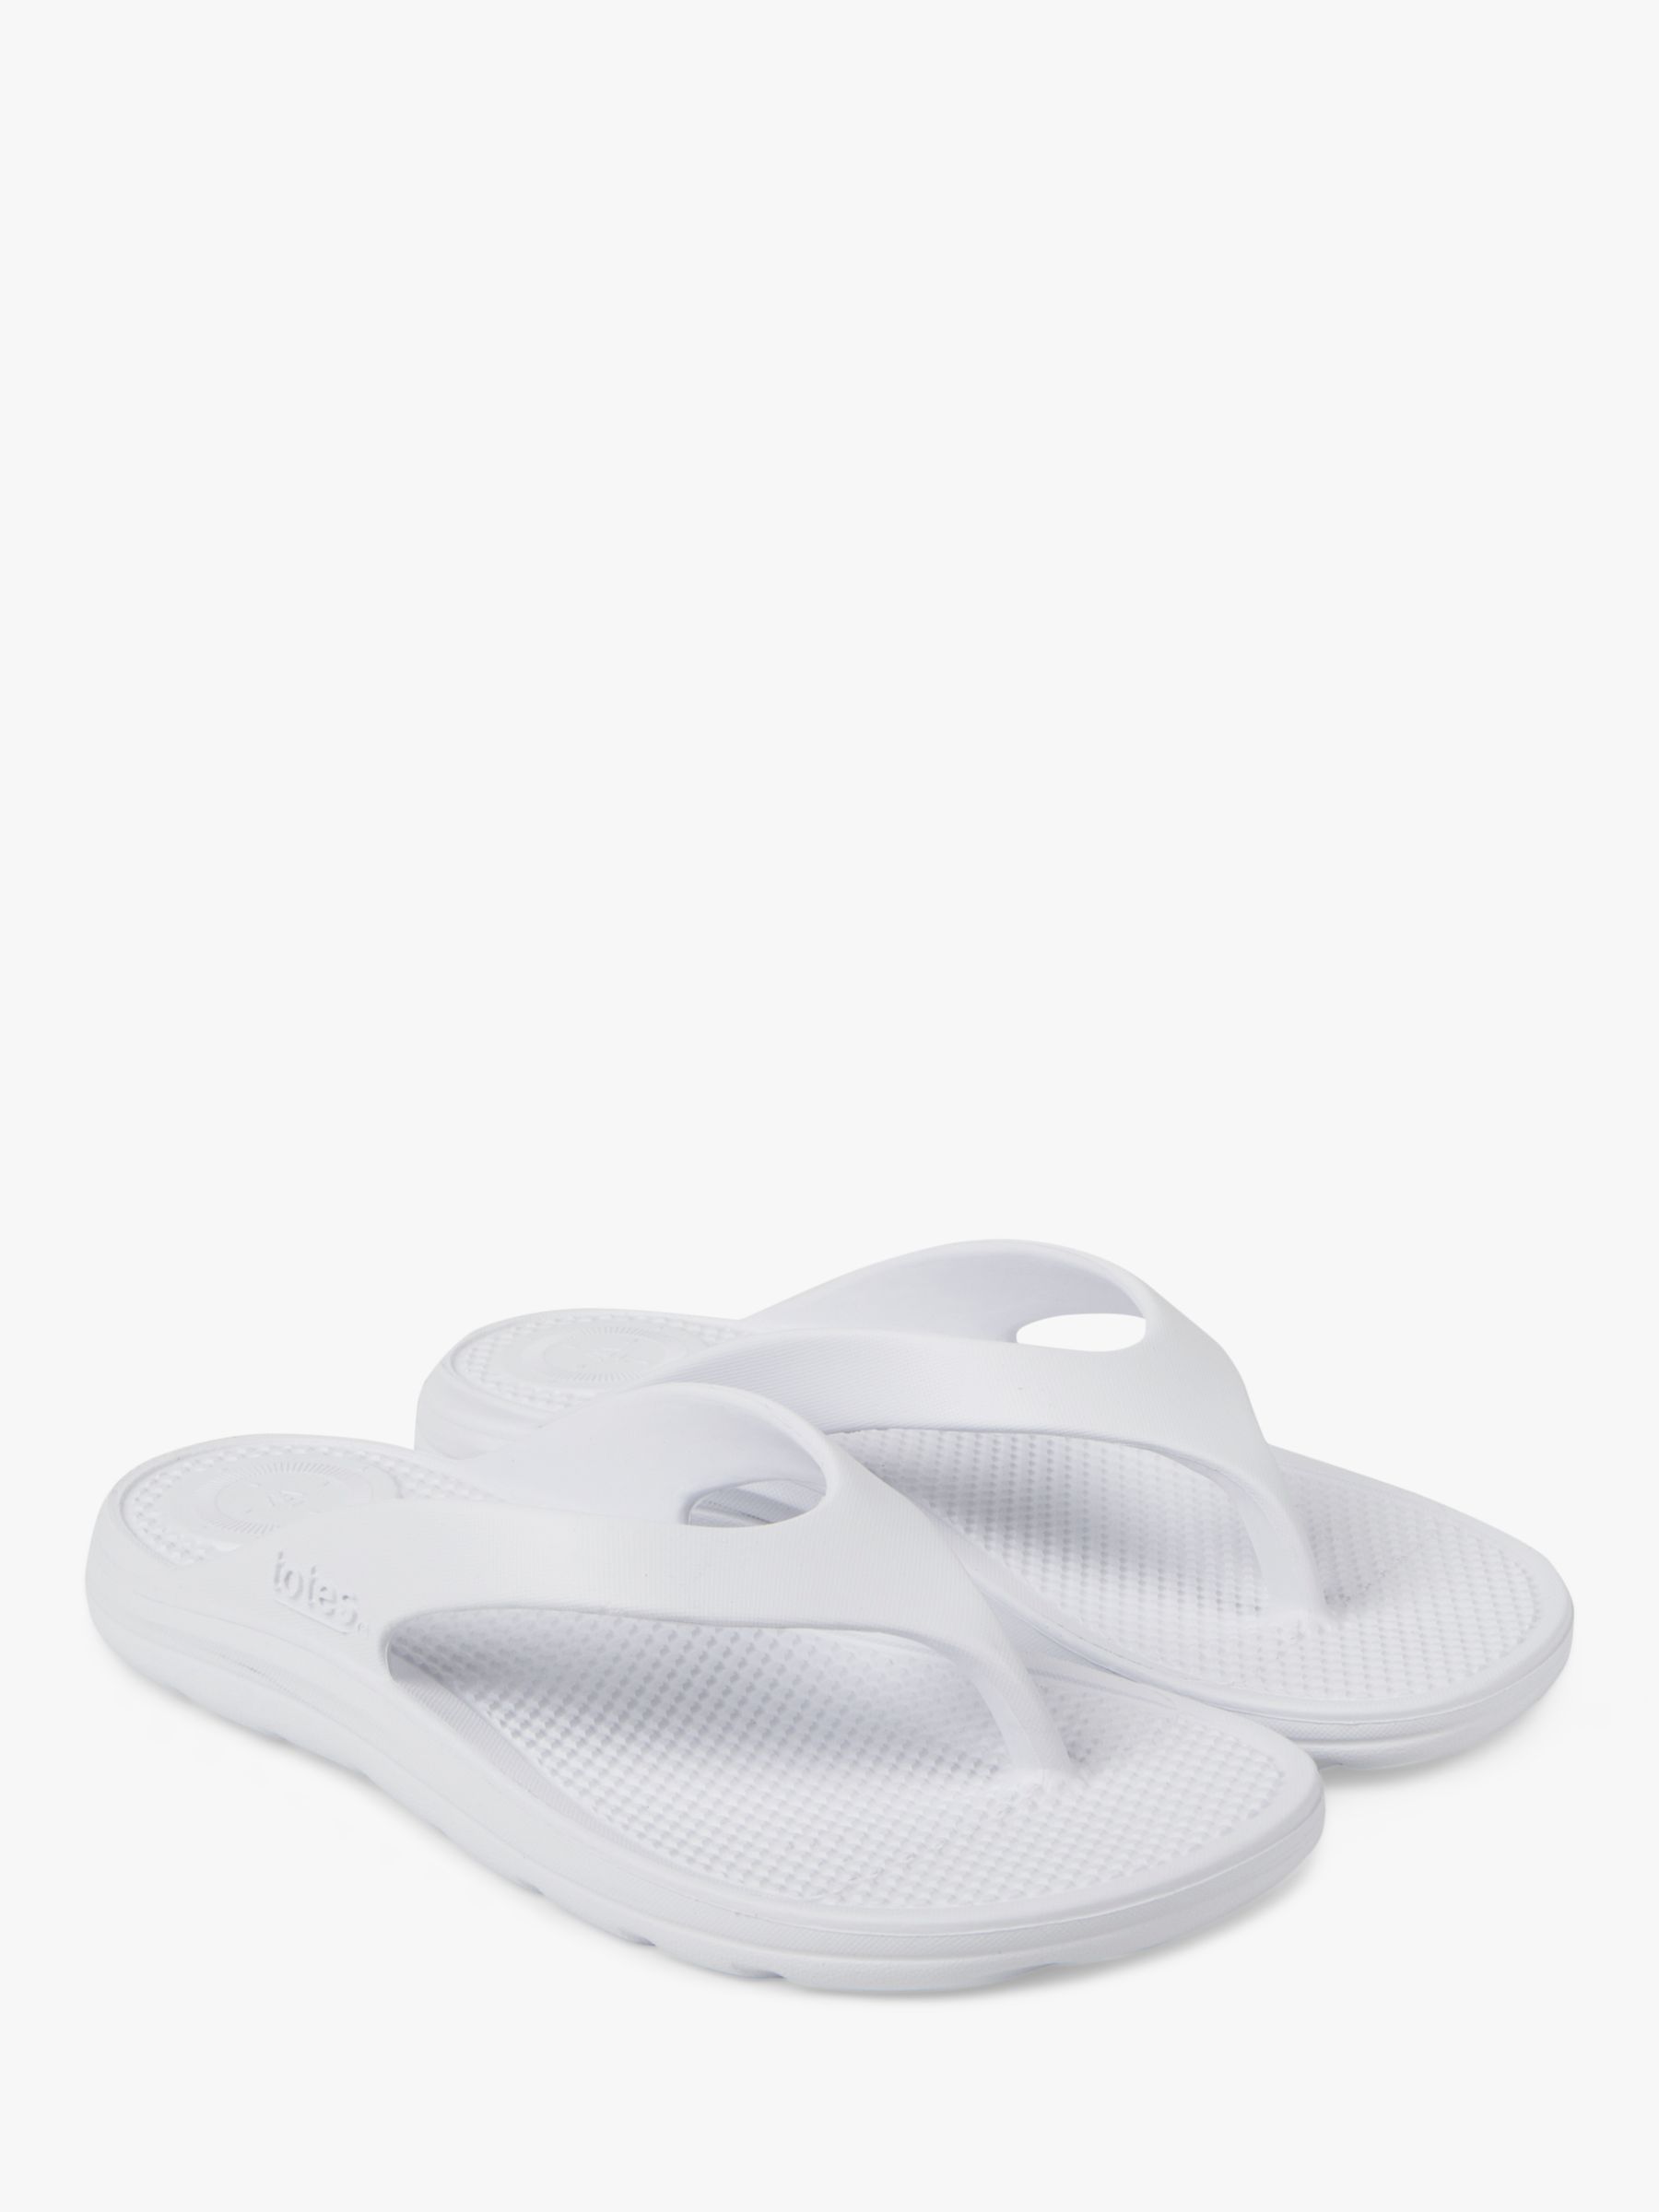 totes SOLBOUNCE Toe Post Sandals, White at John Lewis & Partners